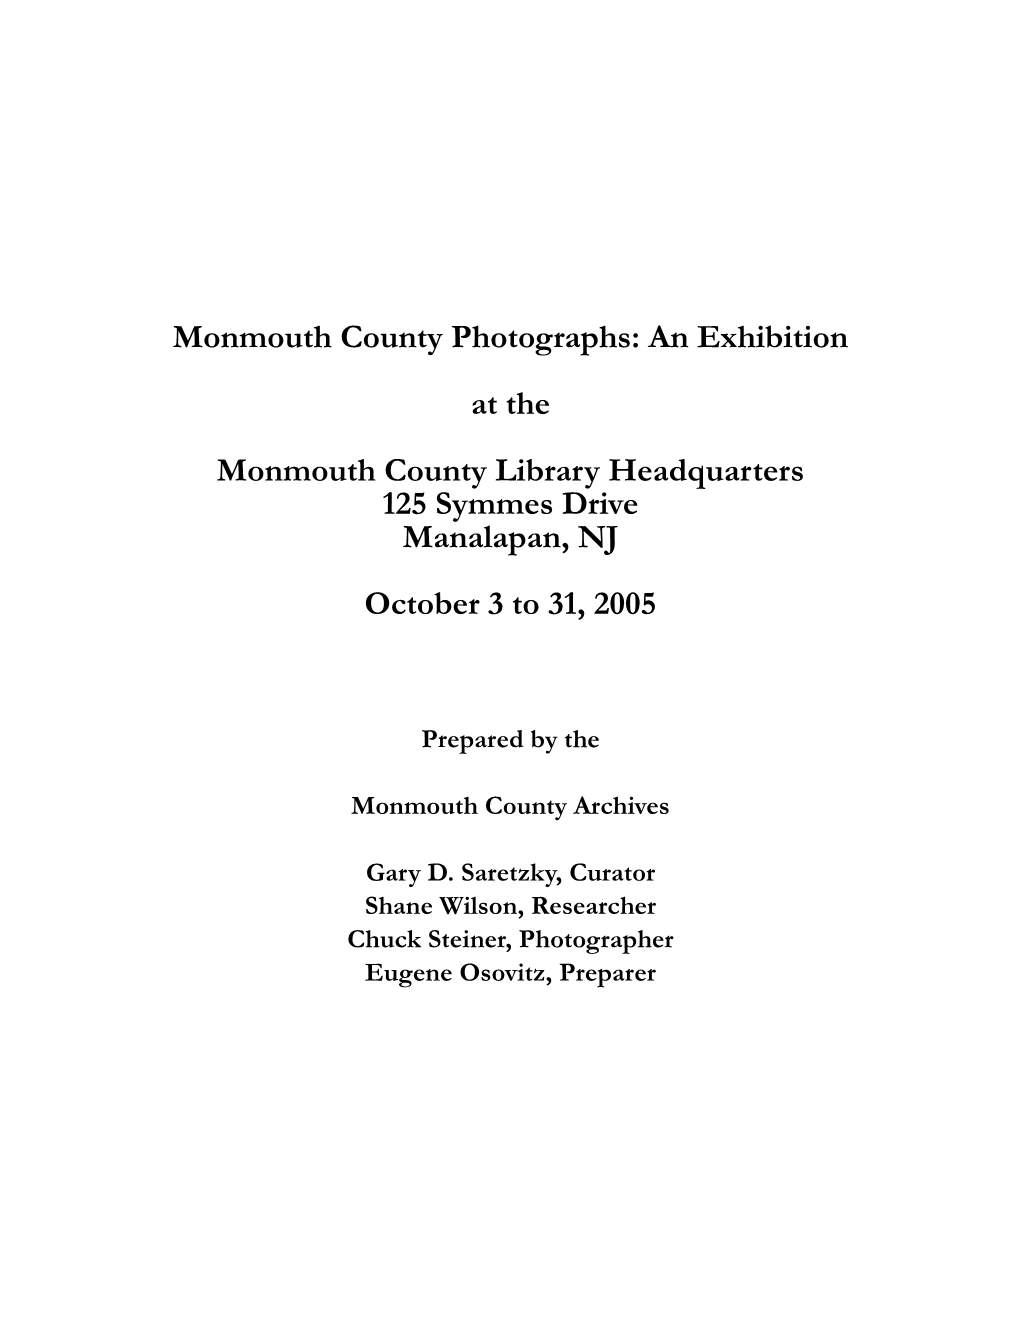 Monmouth County Archives